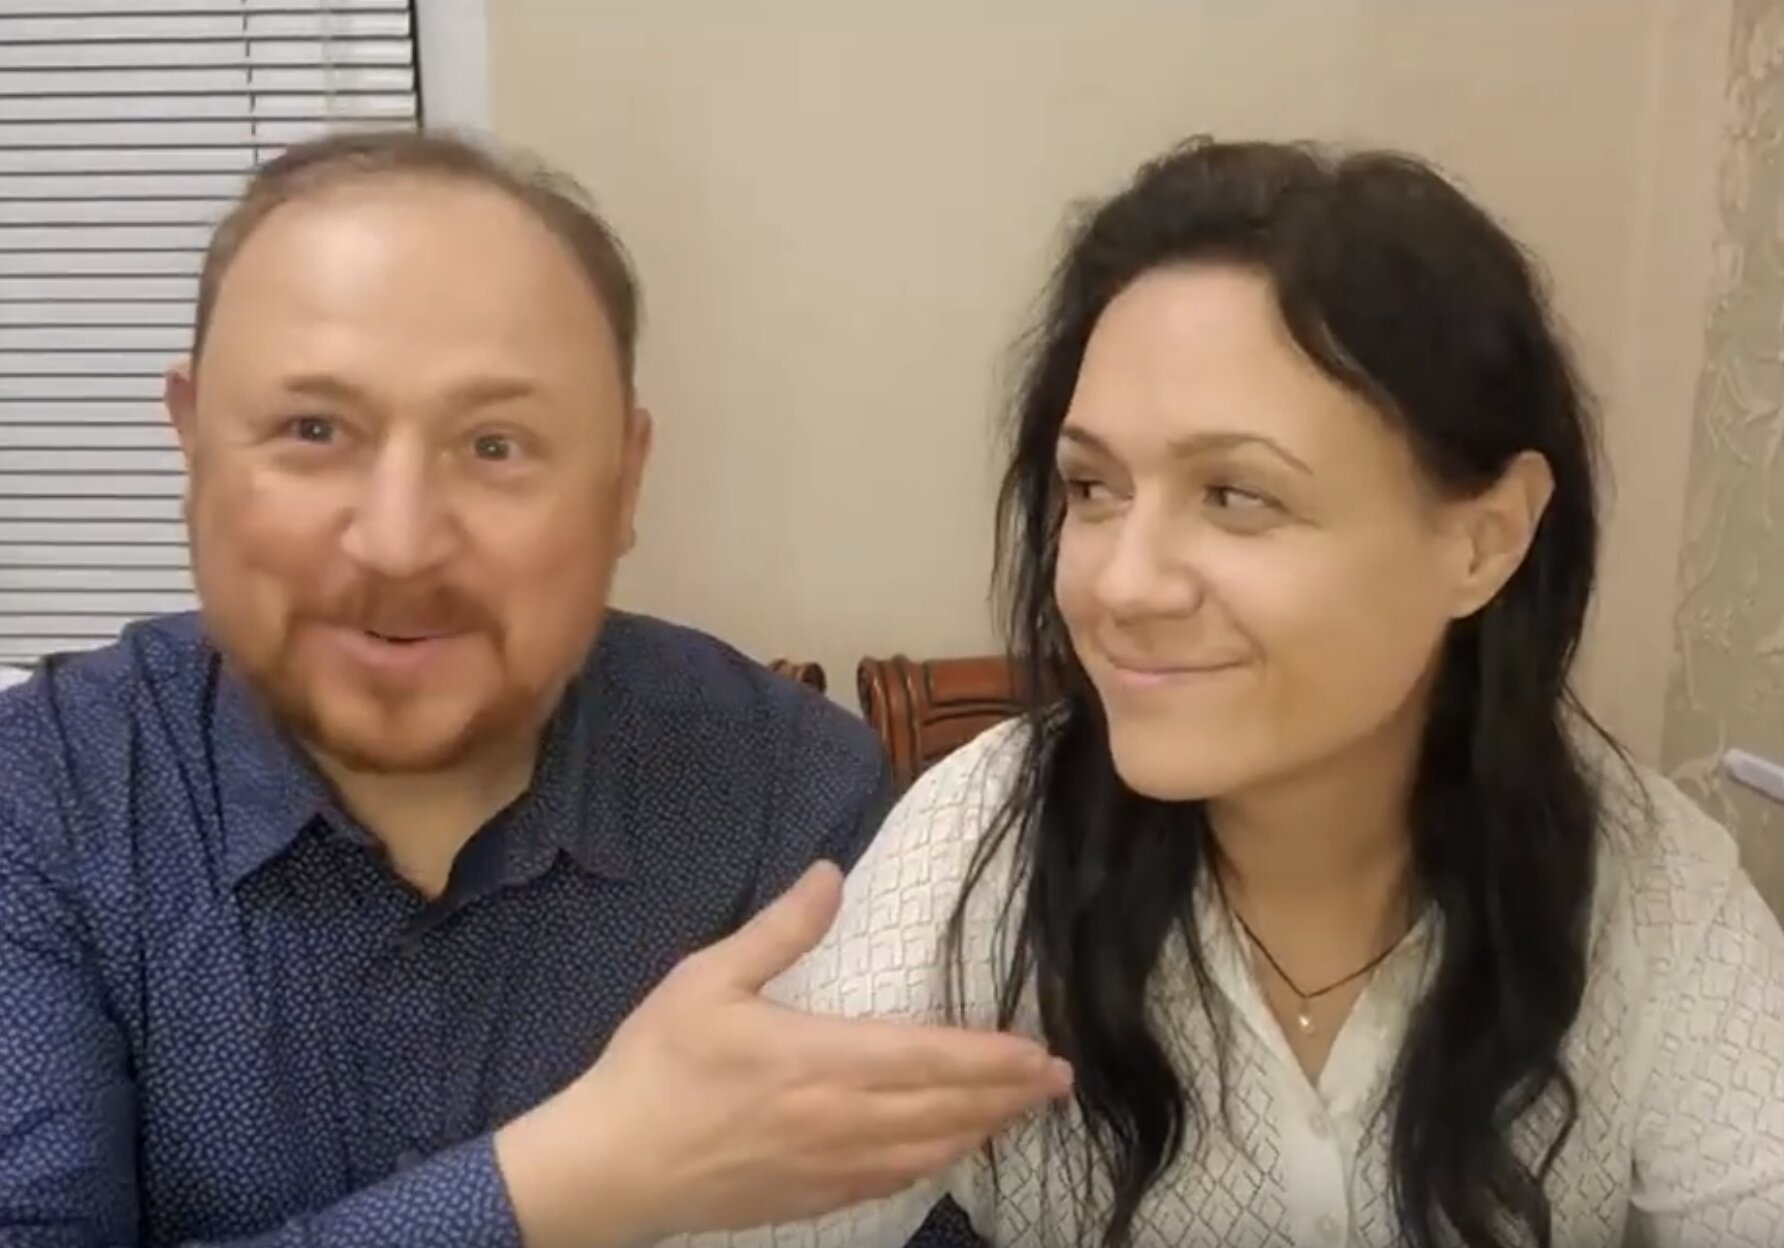 DHM Podcast – Introducing Pastor Alexander and Yulia from Kyiv